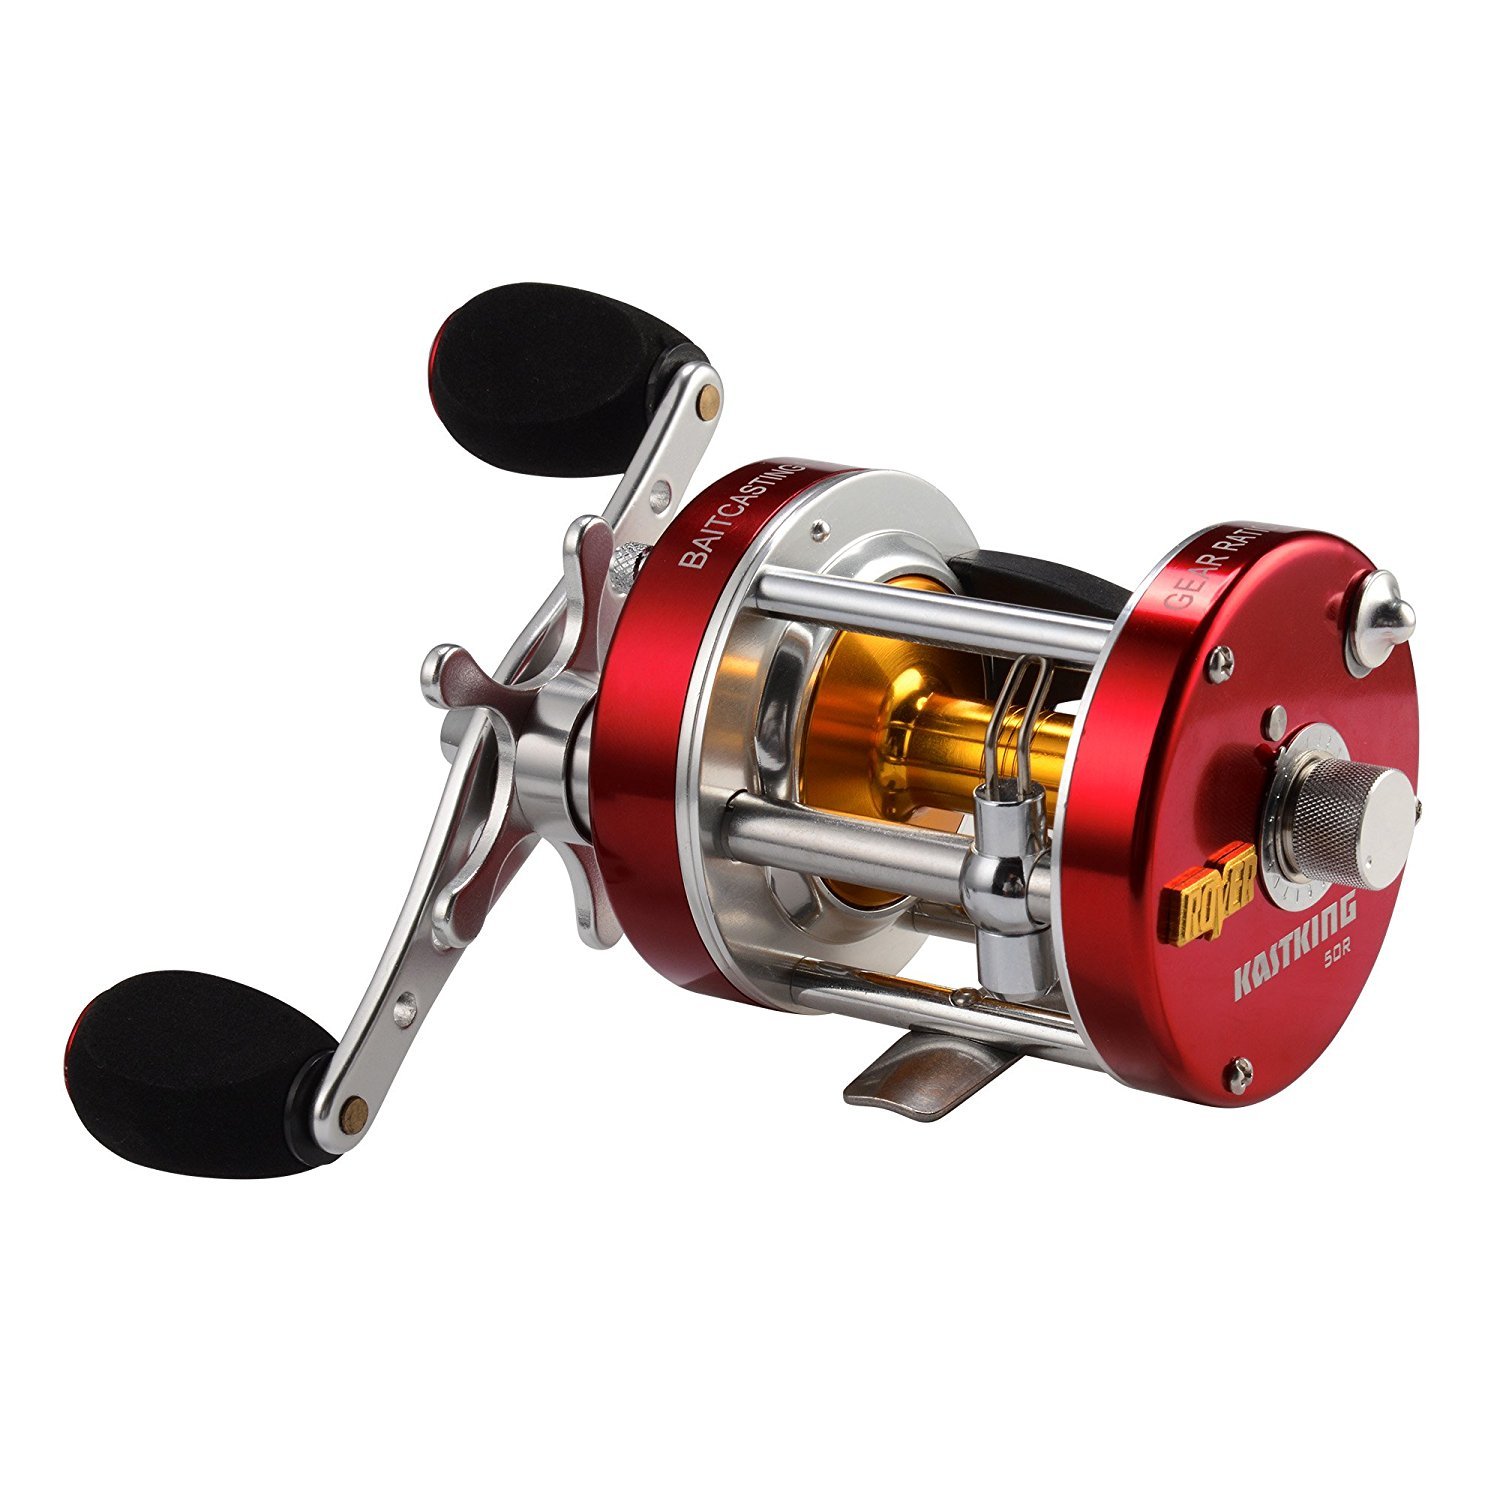 KastKing Rover Round Baitcasting Reel, Perfect Conventional Reel for Catfish,  Salmon/Steelhead, Striper Bass and Inshore